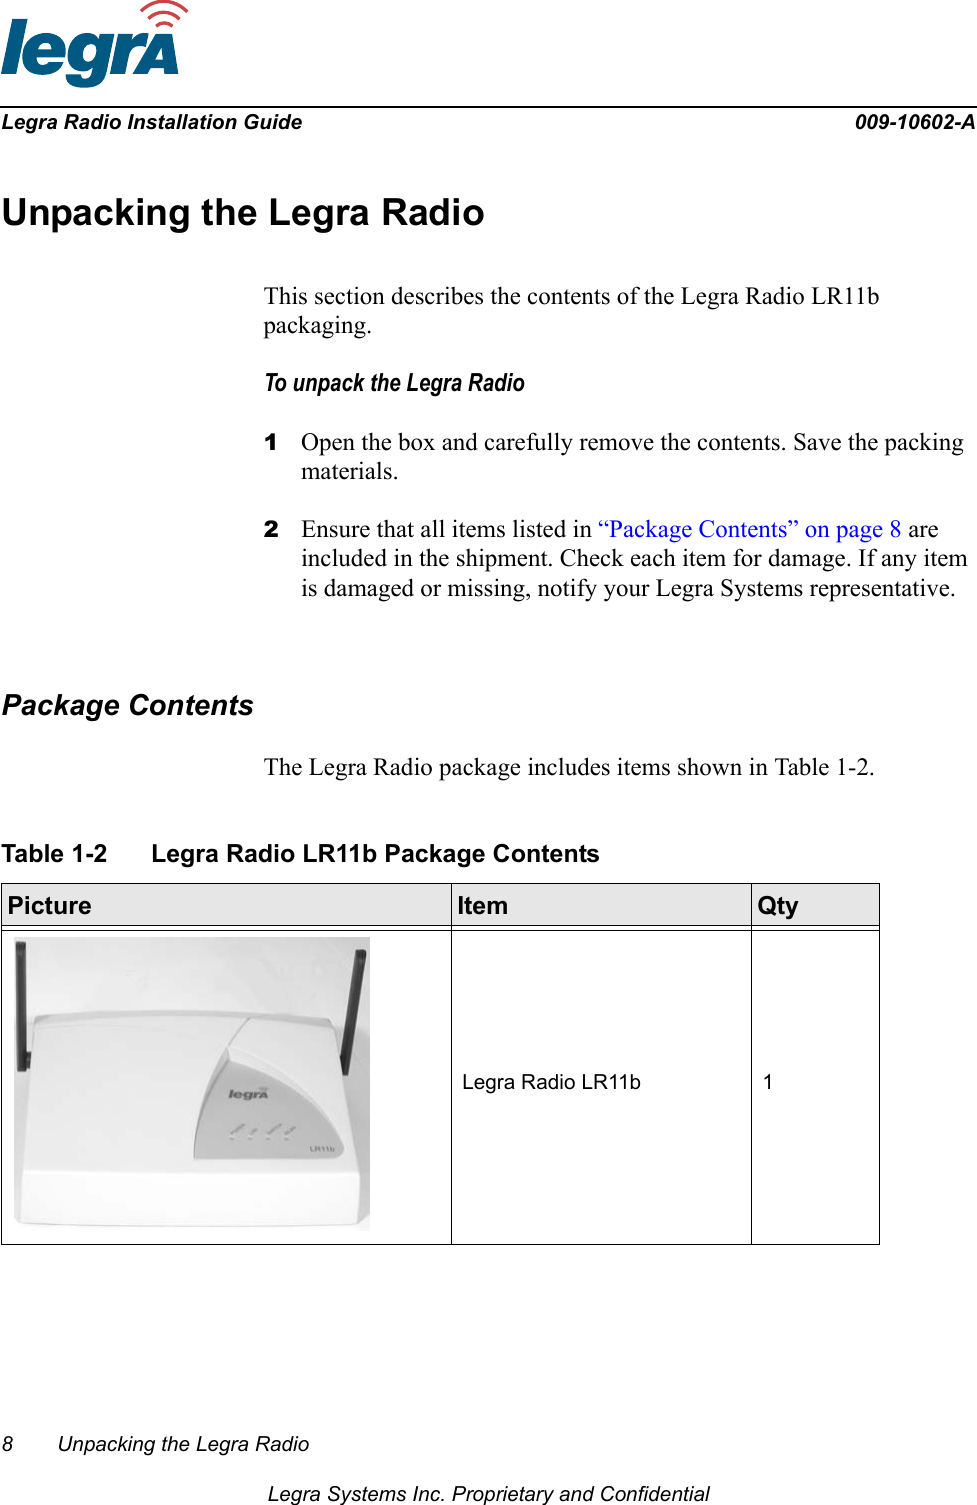 8 Unpacking the Legra RadioLegra Systems Inc. Proprietary and ConfidentialLegra Radio Installation Guide 009-10602-AUnpacking the Legra RadioThis section describes the contents of the Legra Radio LR11b packaging.To unpack the Legra Radio1Open the box and carefully remove the contents. Save the packing materials.2Ensure that all items listed in “Package Contents” on page 8 are included in the shipment. Check each item for damage. If any item is damaged or missing, notify your Legra Systems representative.Package ContentsThe Legra Radio package includes items shown in Table 1-2.Table 1-2 Legra Radio LR11b Package Contents  Picture Item QtyLegra Radio LR11b 1